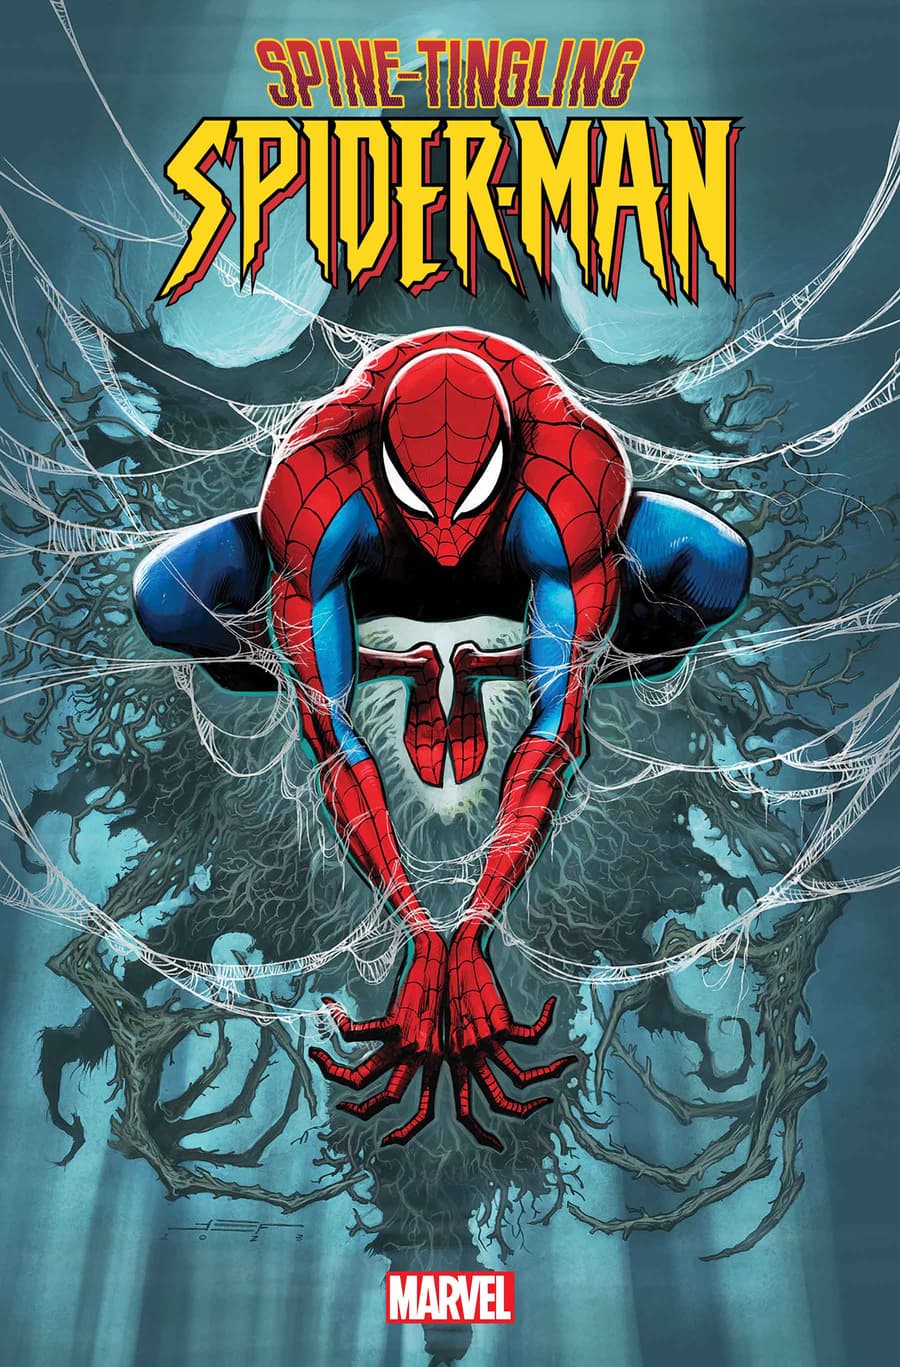 SPINE-TINGLING SPIDER-MAN #0 cover by Juan Ferreyra